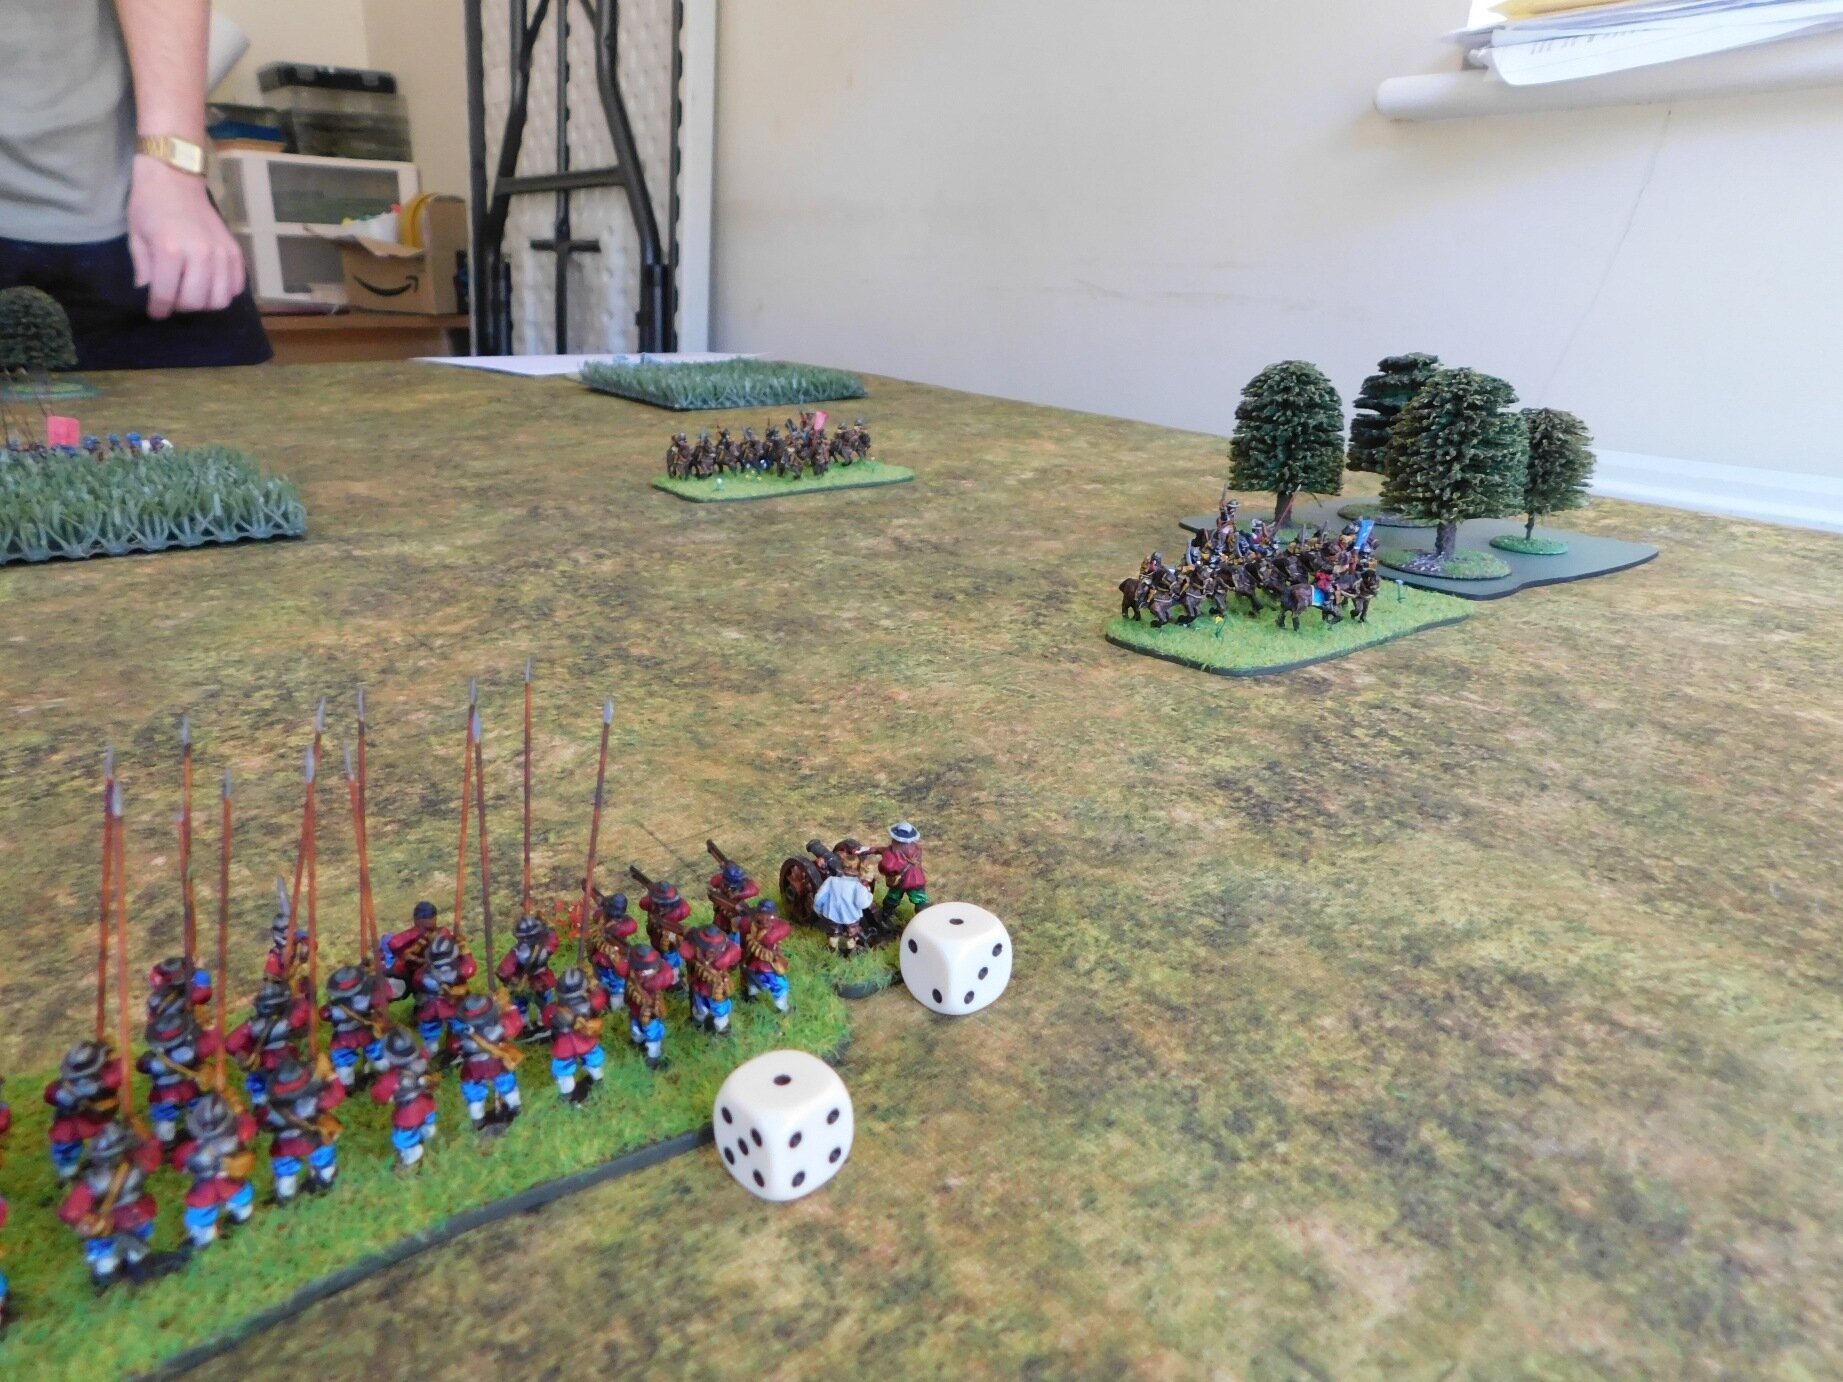 More Royalist Horse threaten my exposed right flank